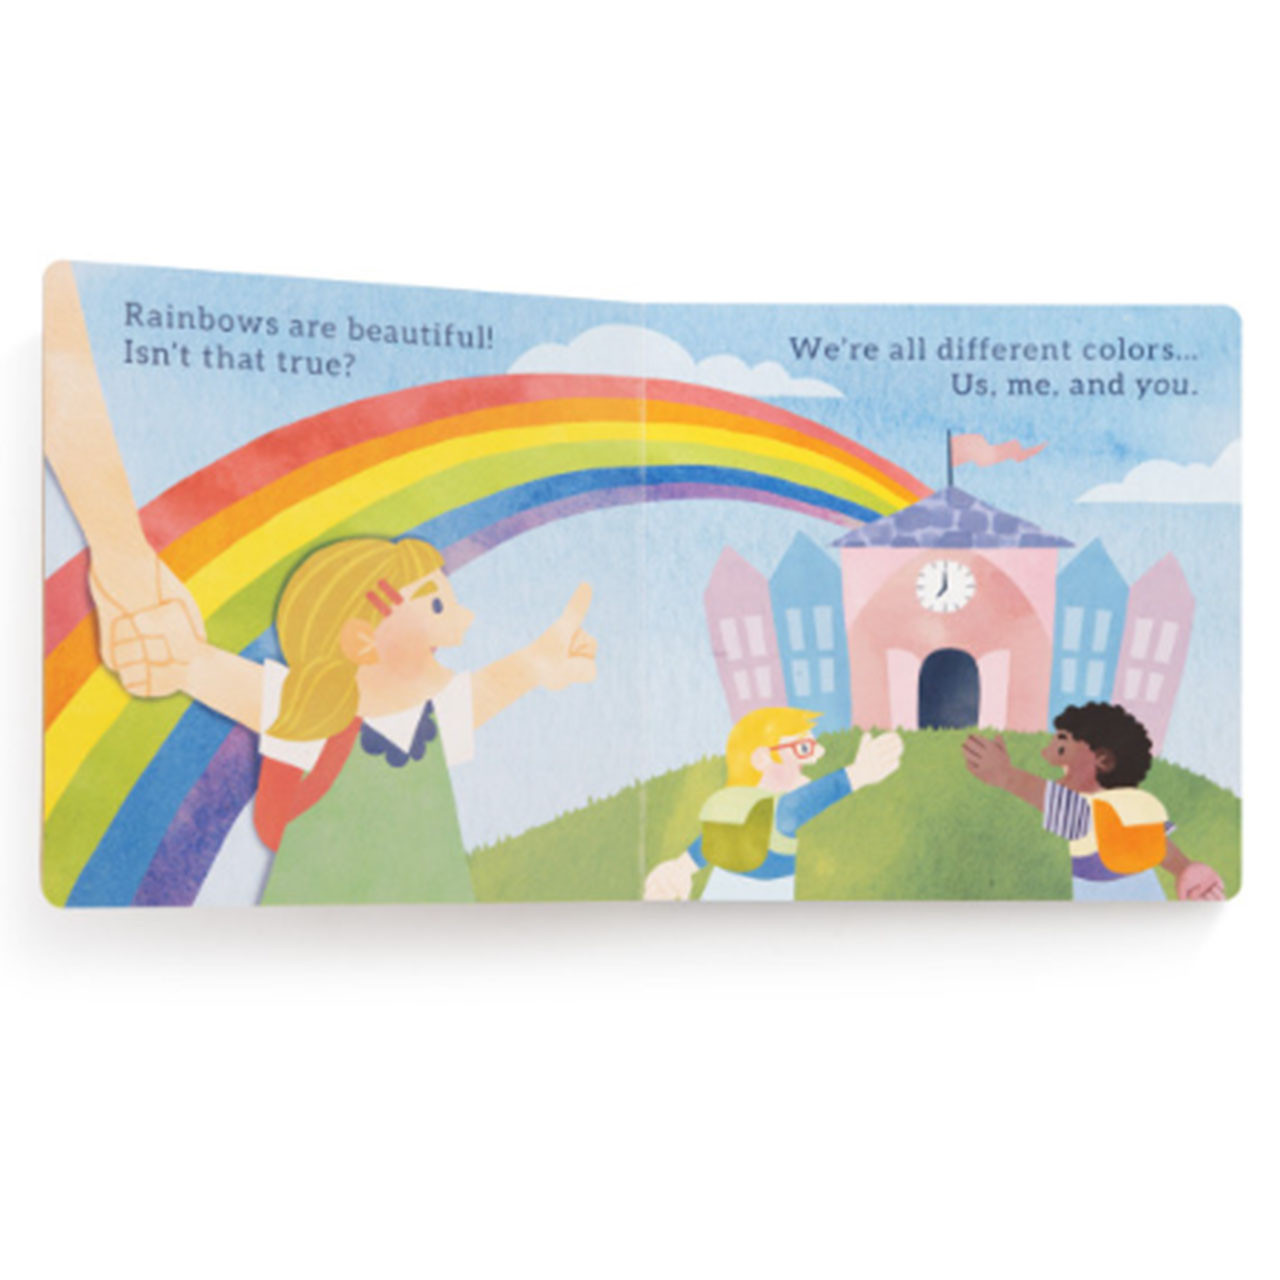 Inside pages of the Hopeful Rainbows Board Book